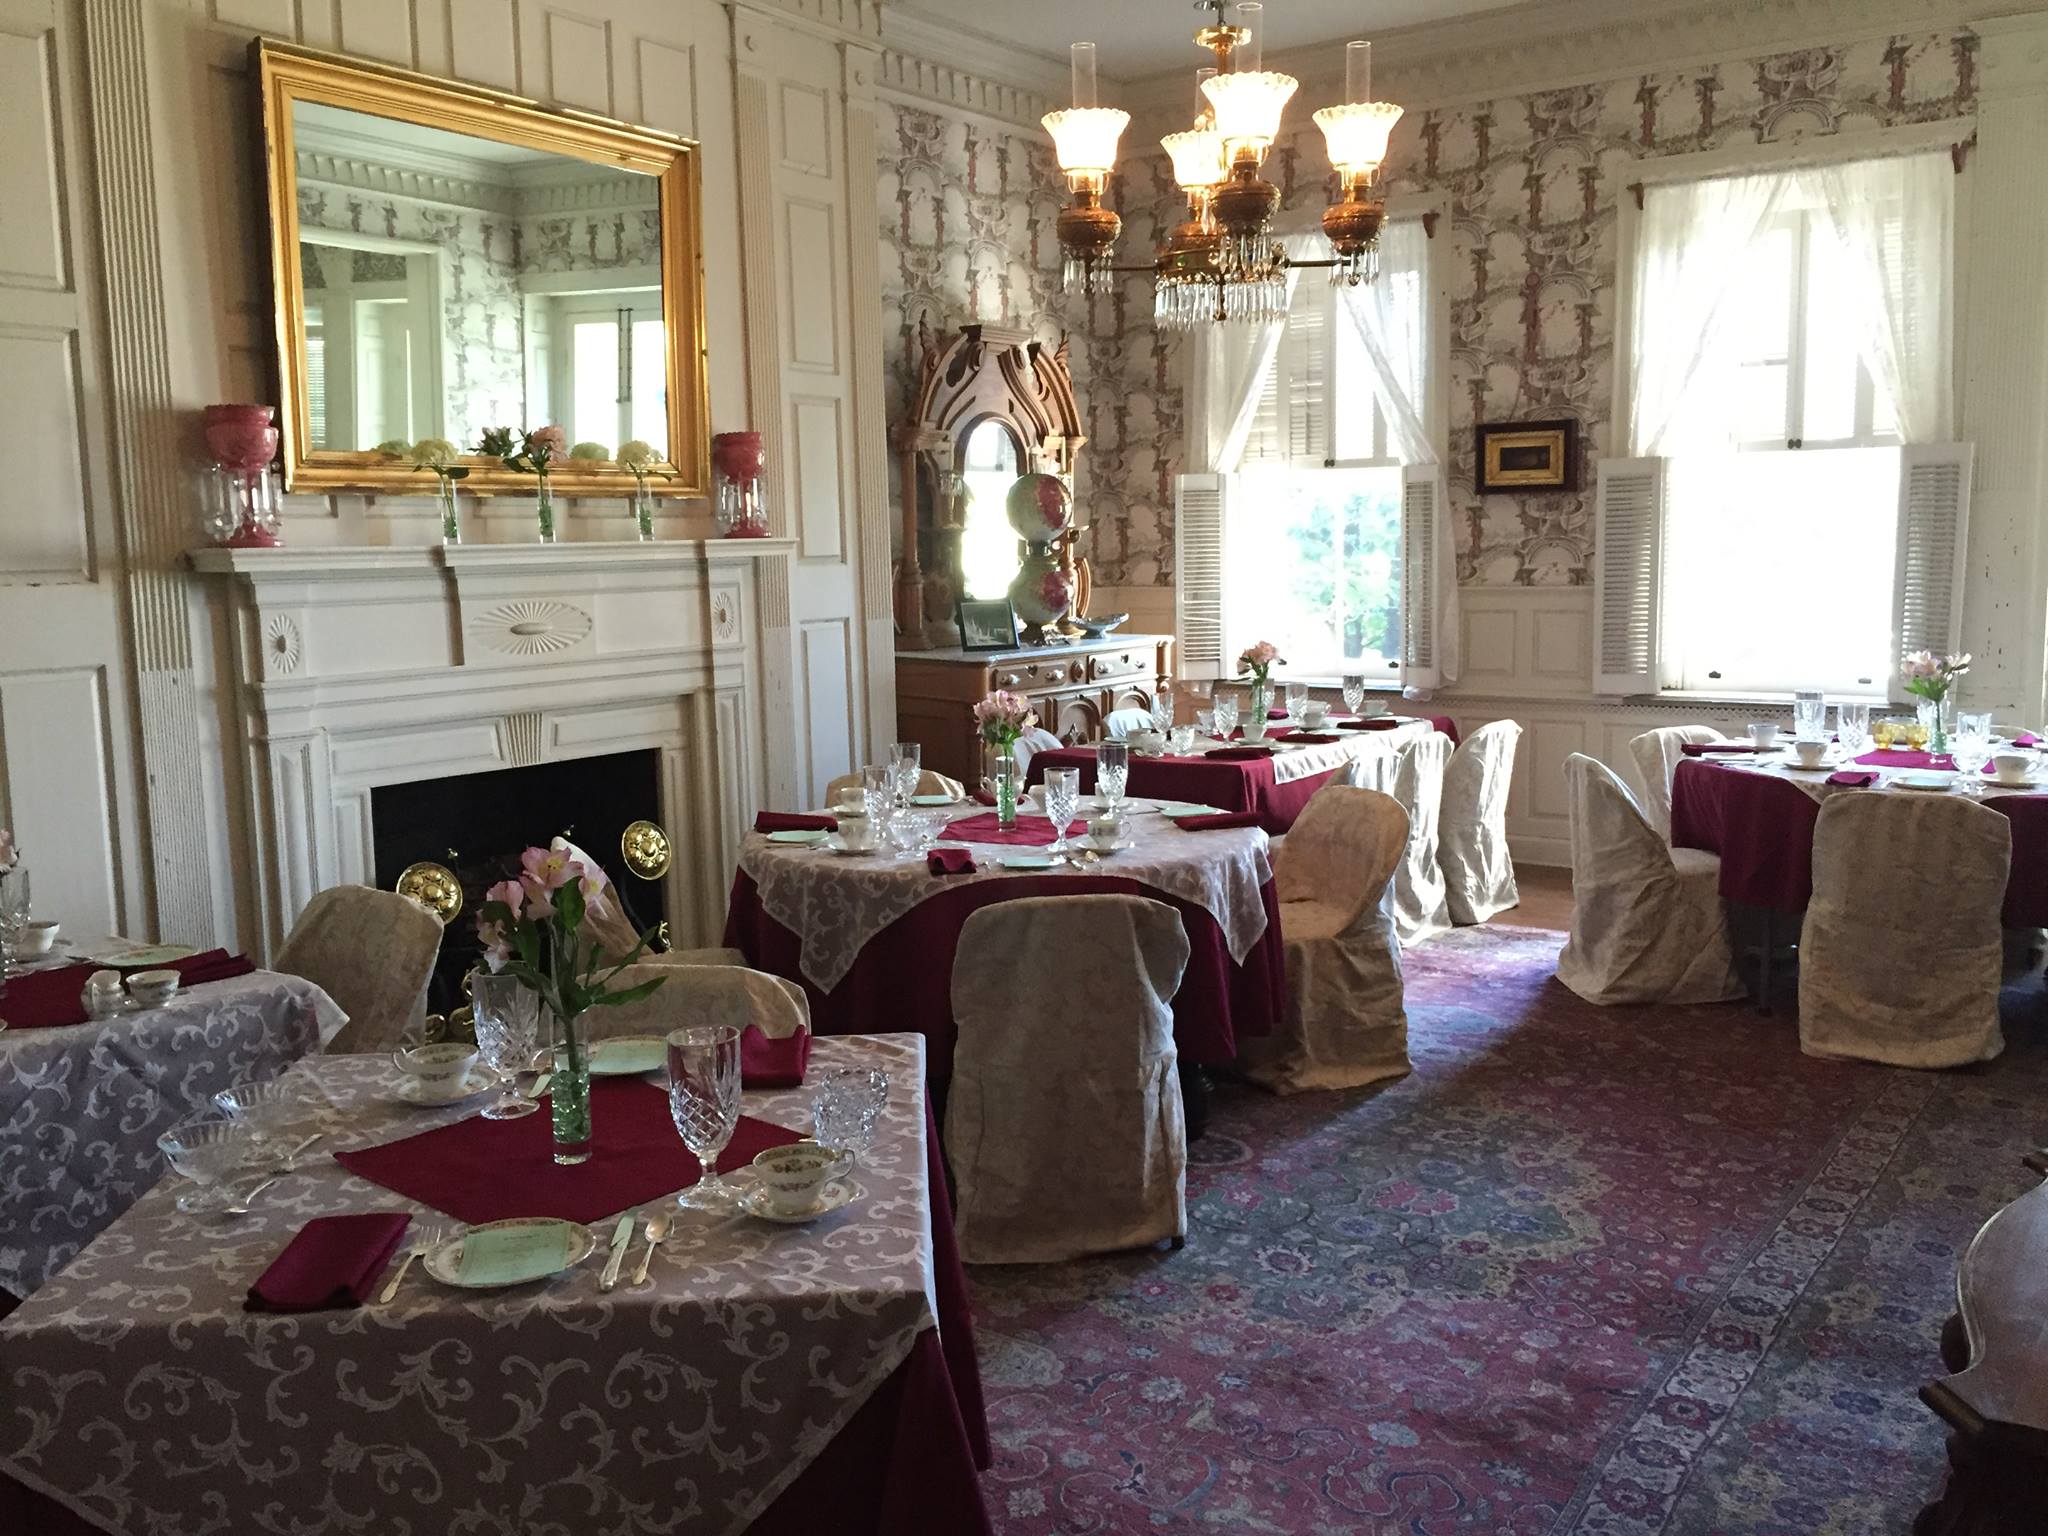 Second Tuesday Tea At White Hall State Historic Site @ White Hall State Historic Site